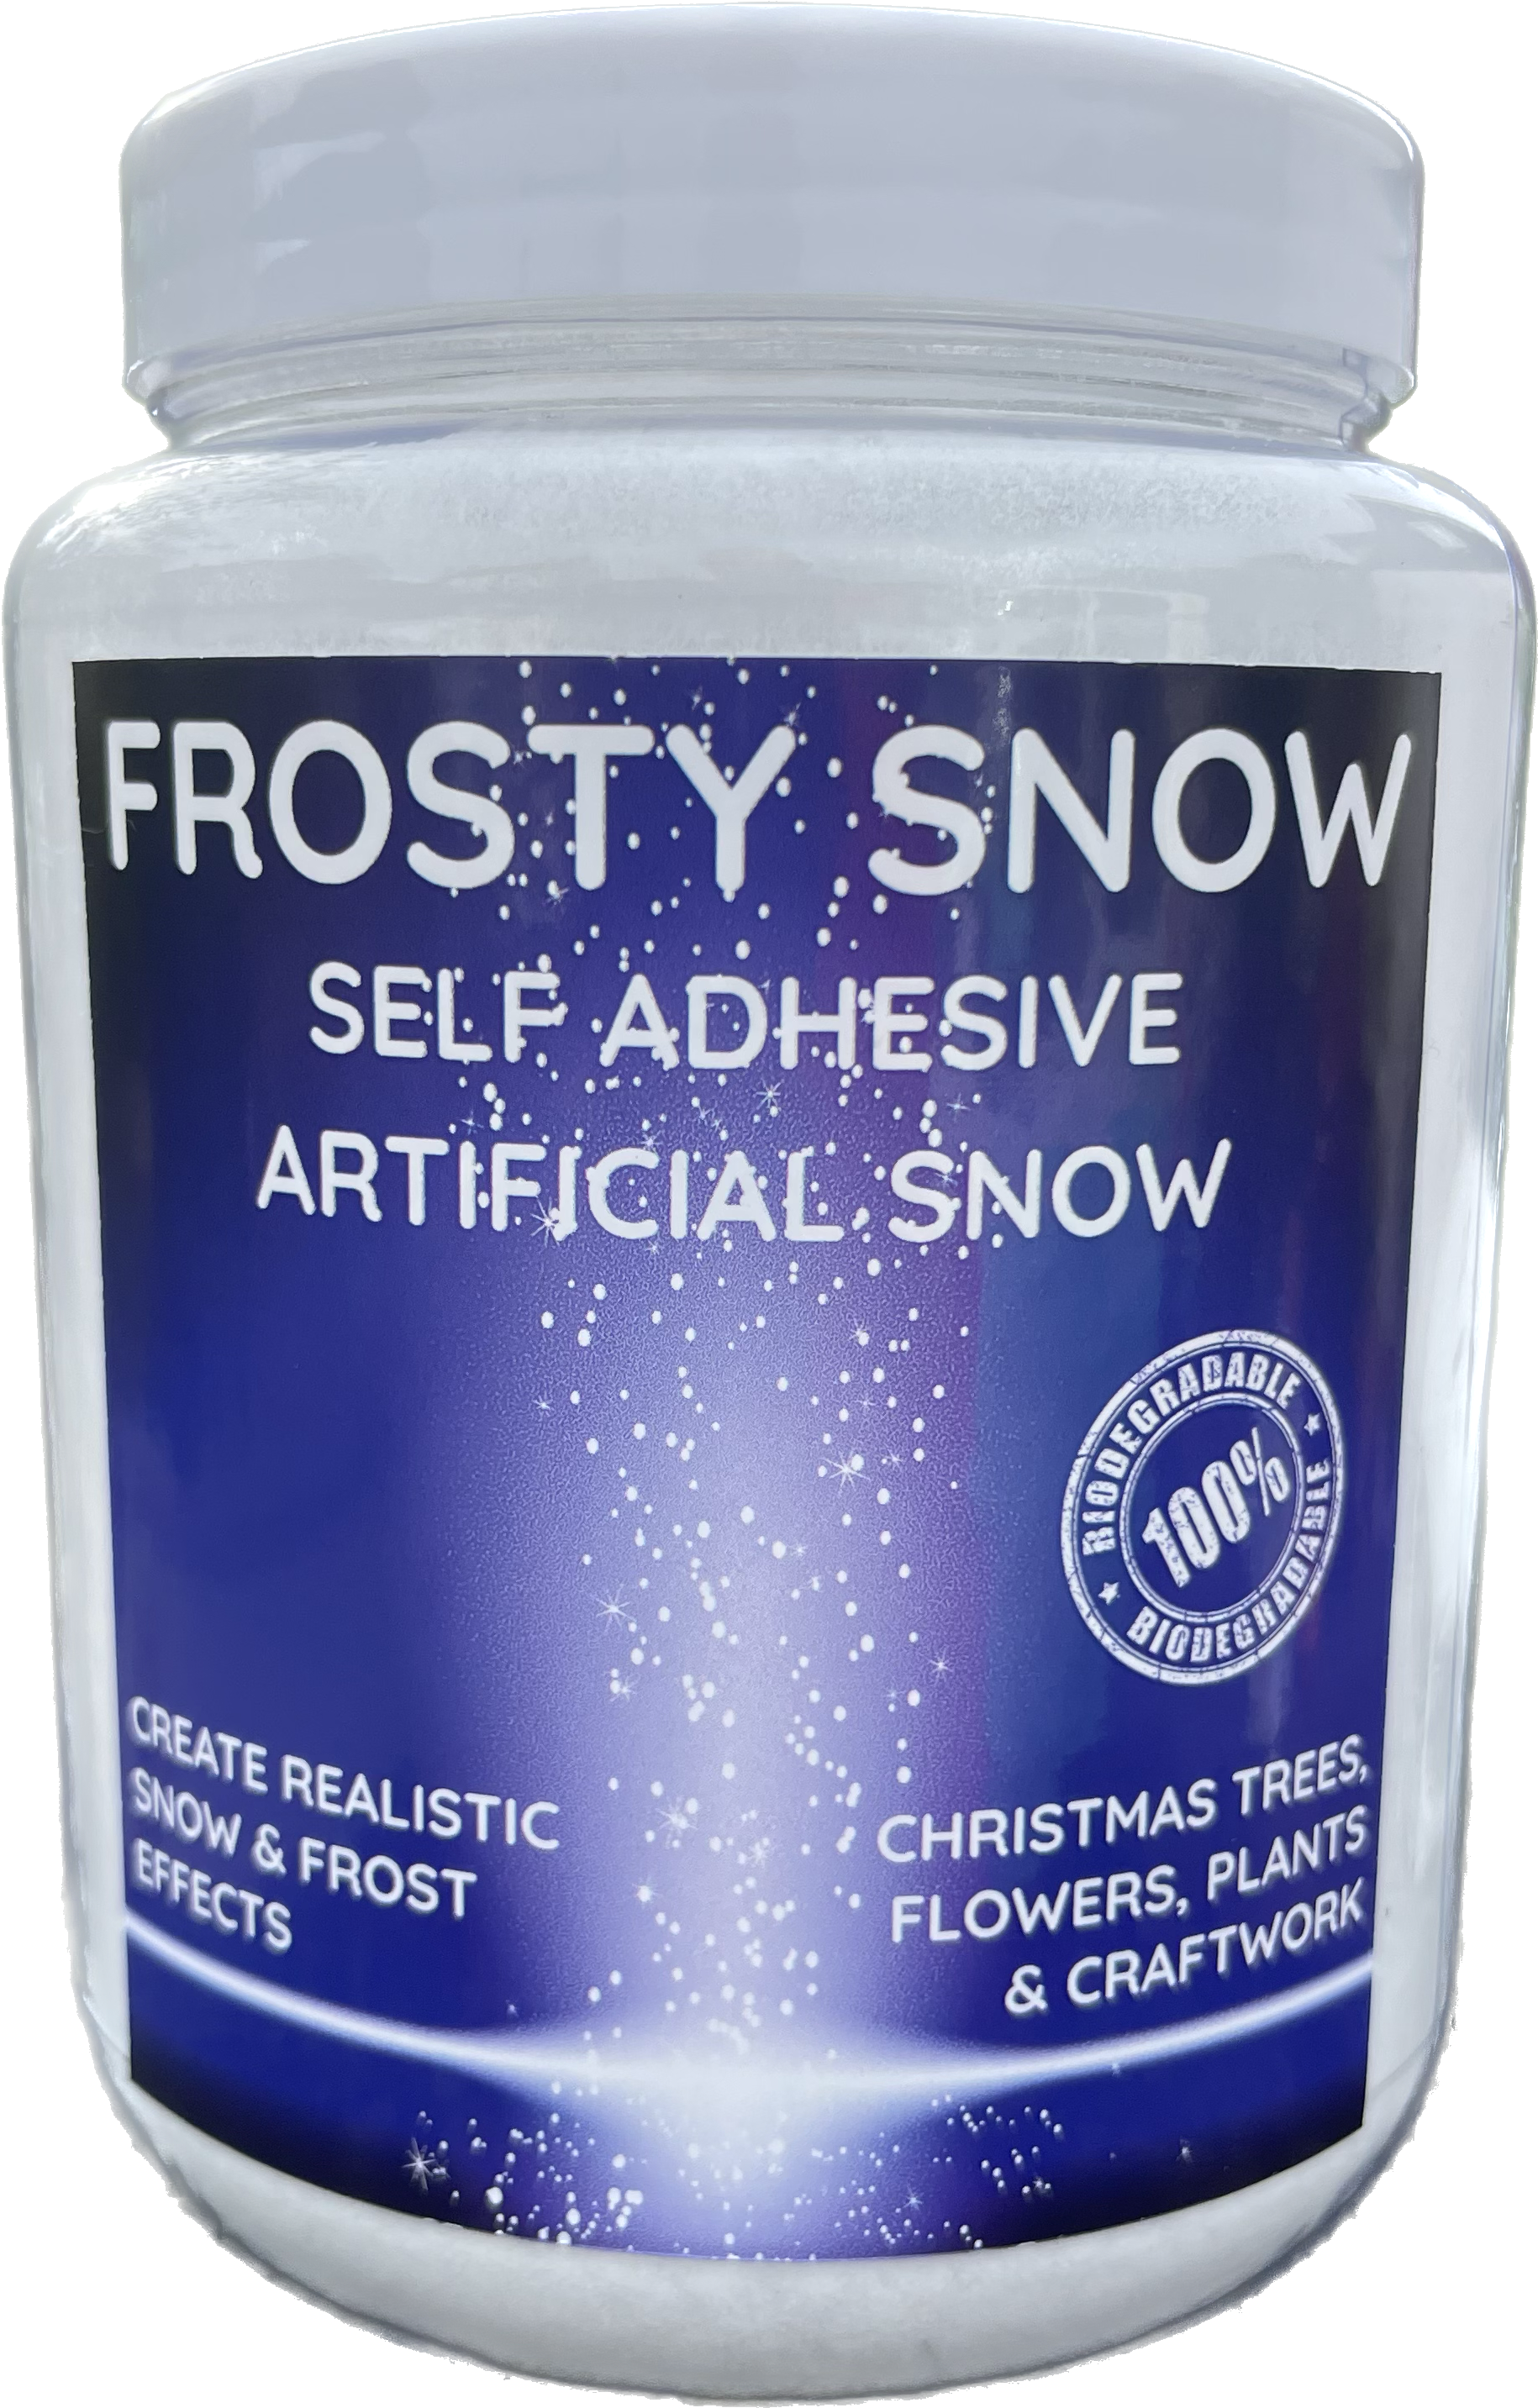 Frosty Snow - Artificial Snow Powder - Biodegradable - Self Adhesive 